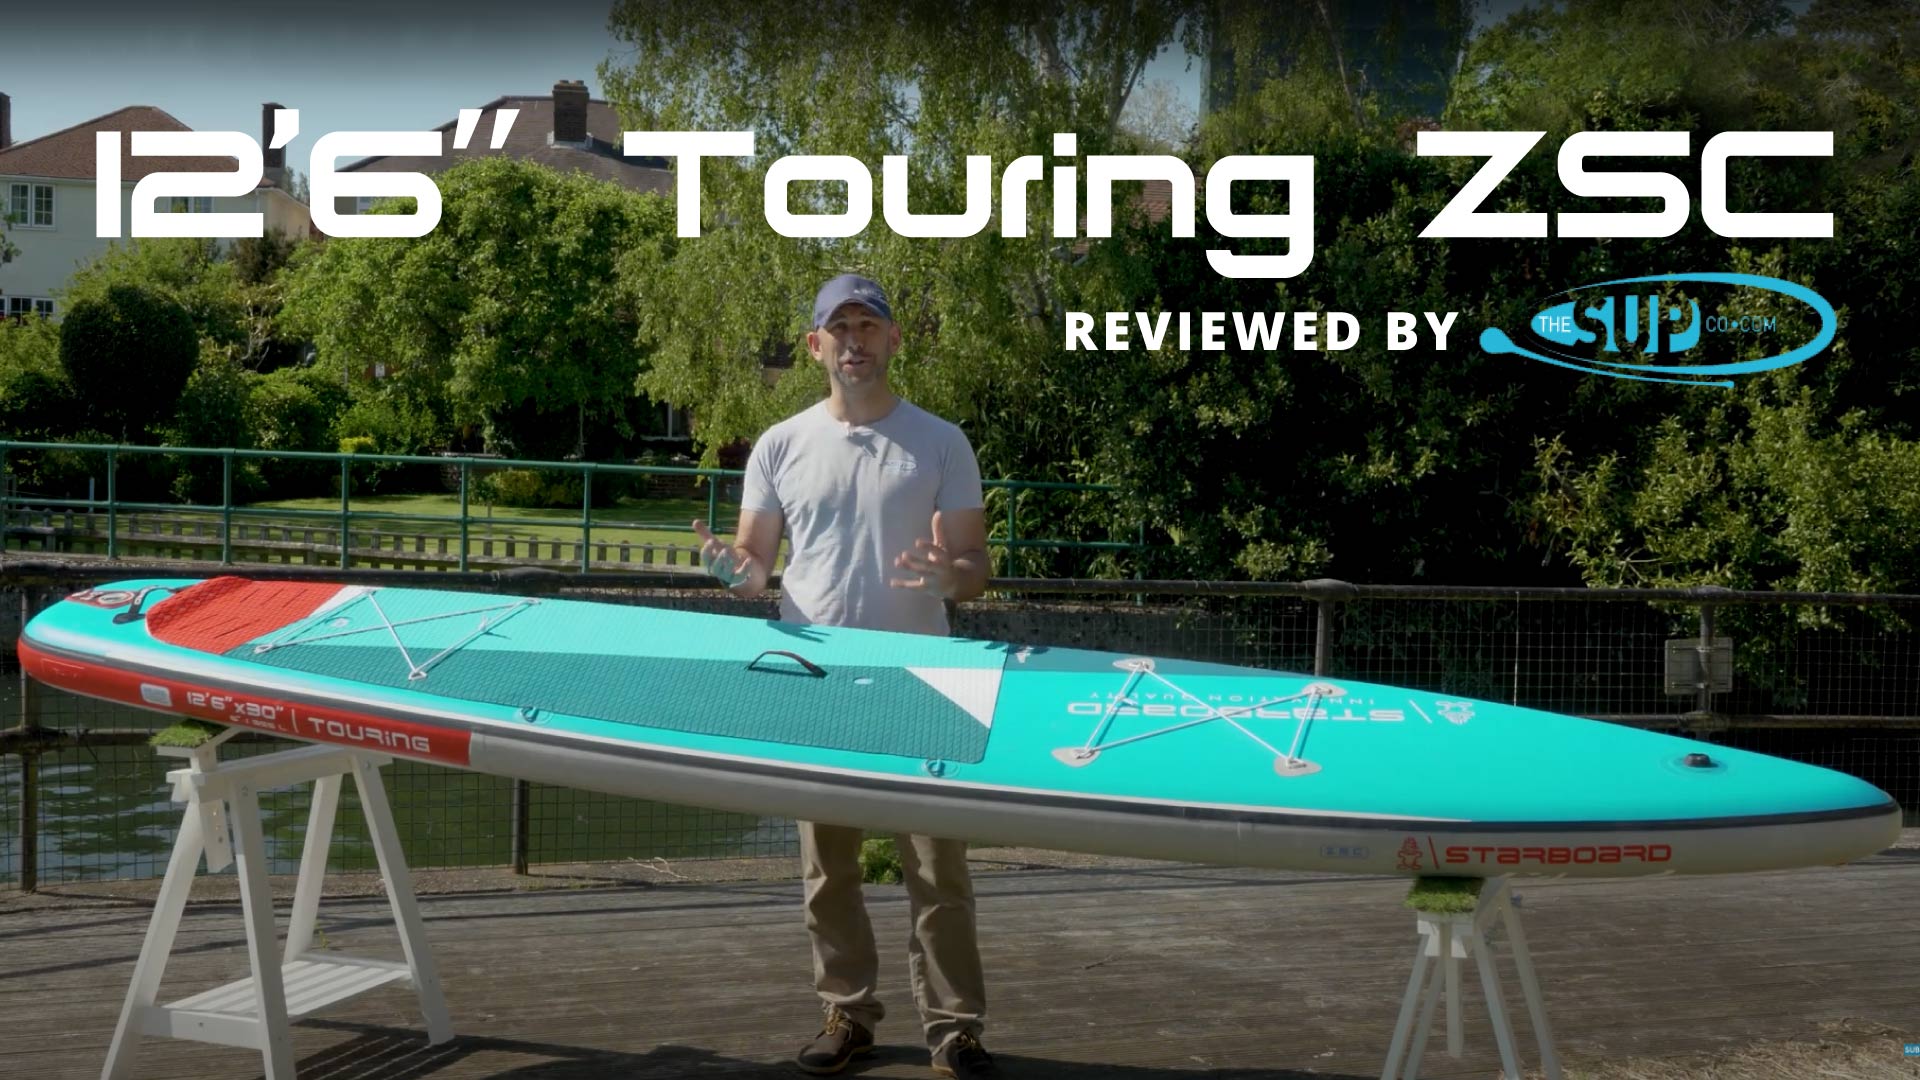 2024 Touring Inflatable Paddle Board » Starboard SUP